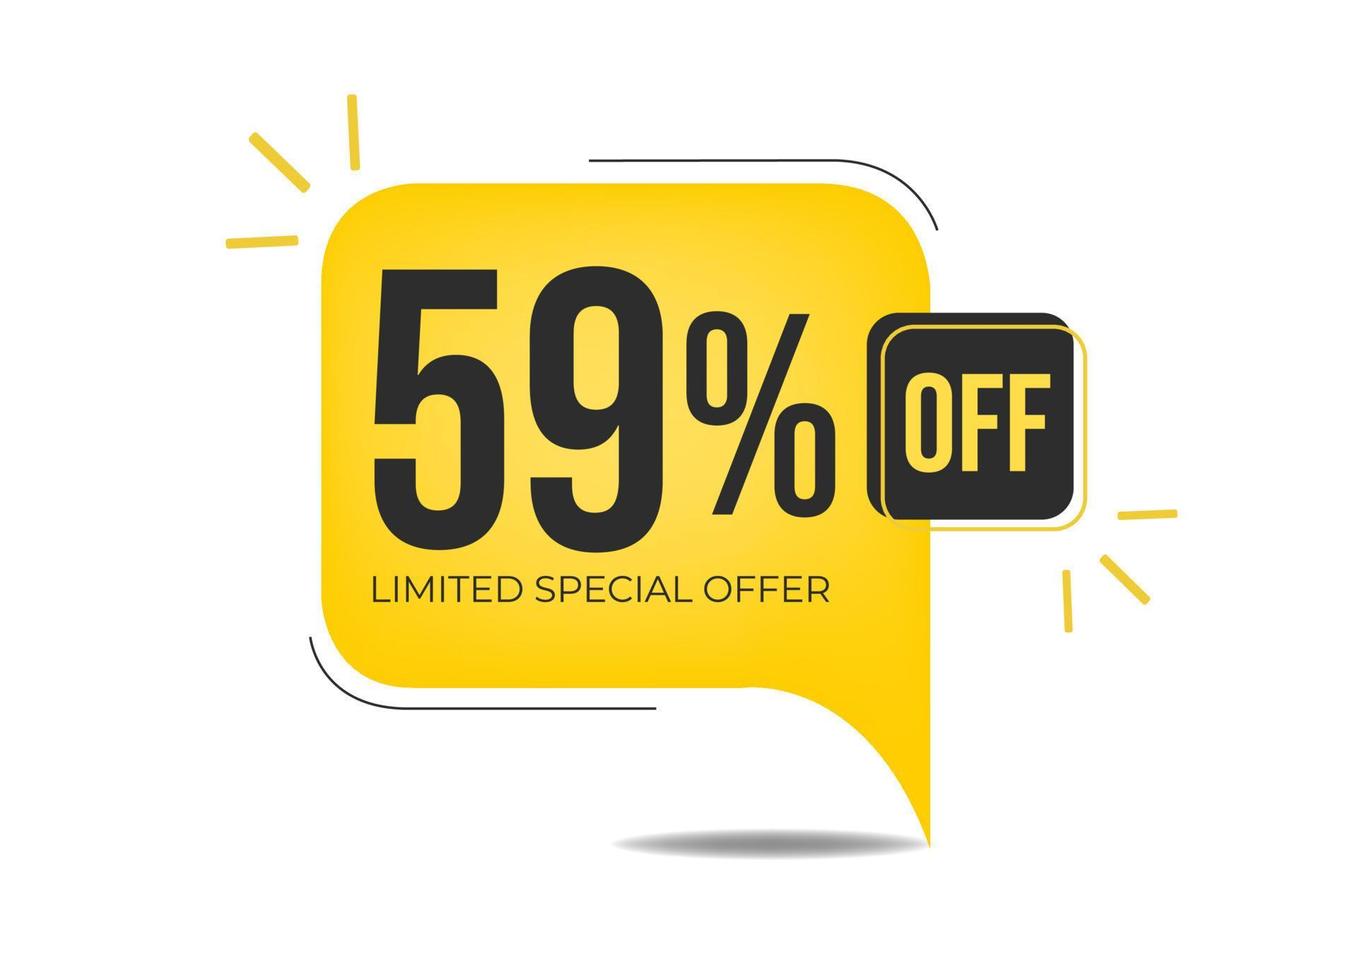 59 off limited special offer. Banner with fifty-nine percent discount on a yellow balloon. vector